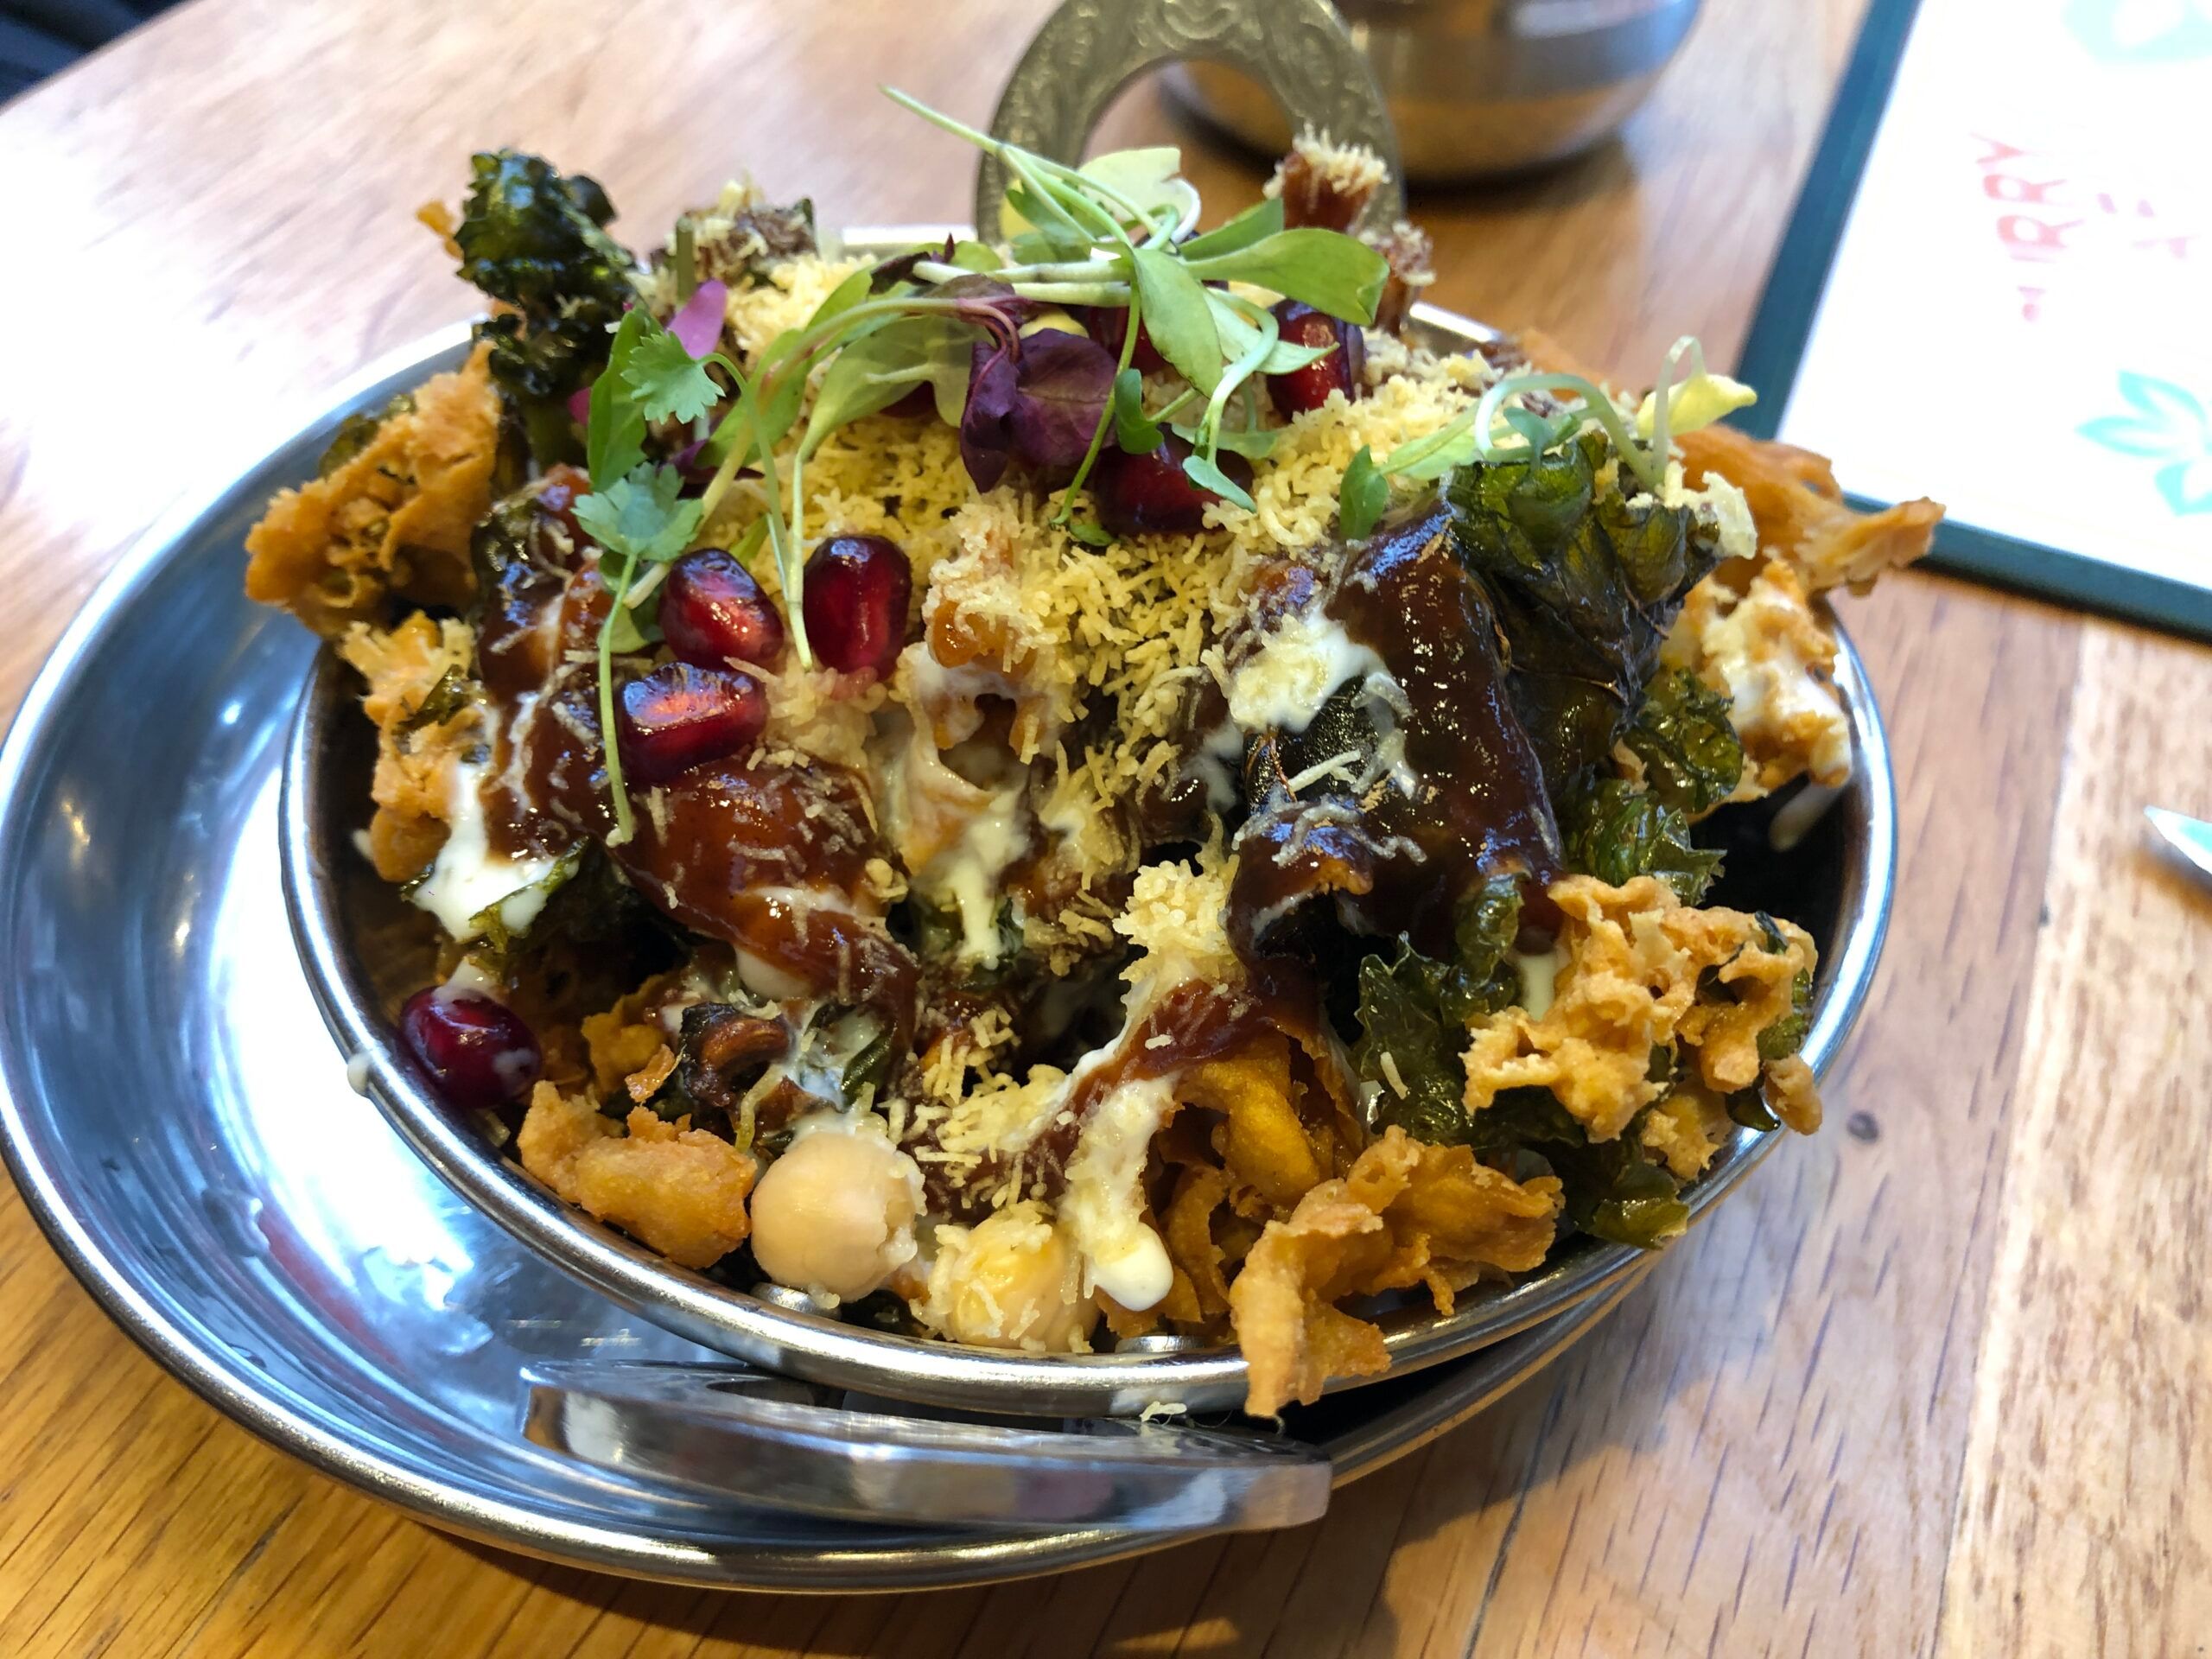 The Kale and Chickpea Chaat